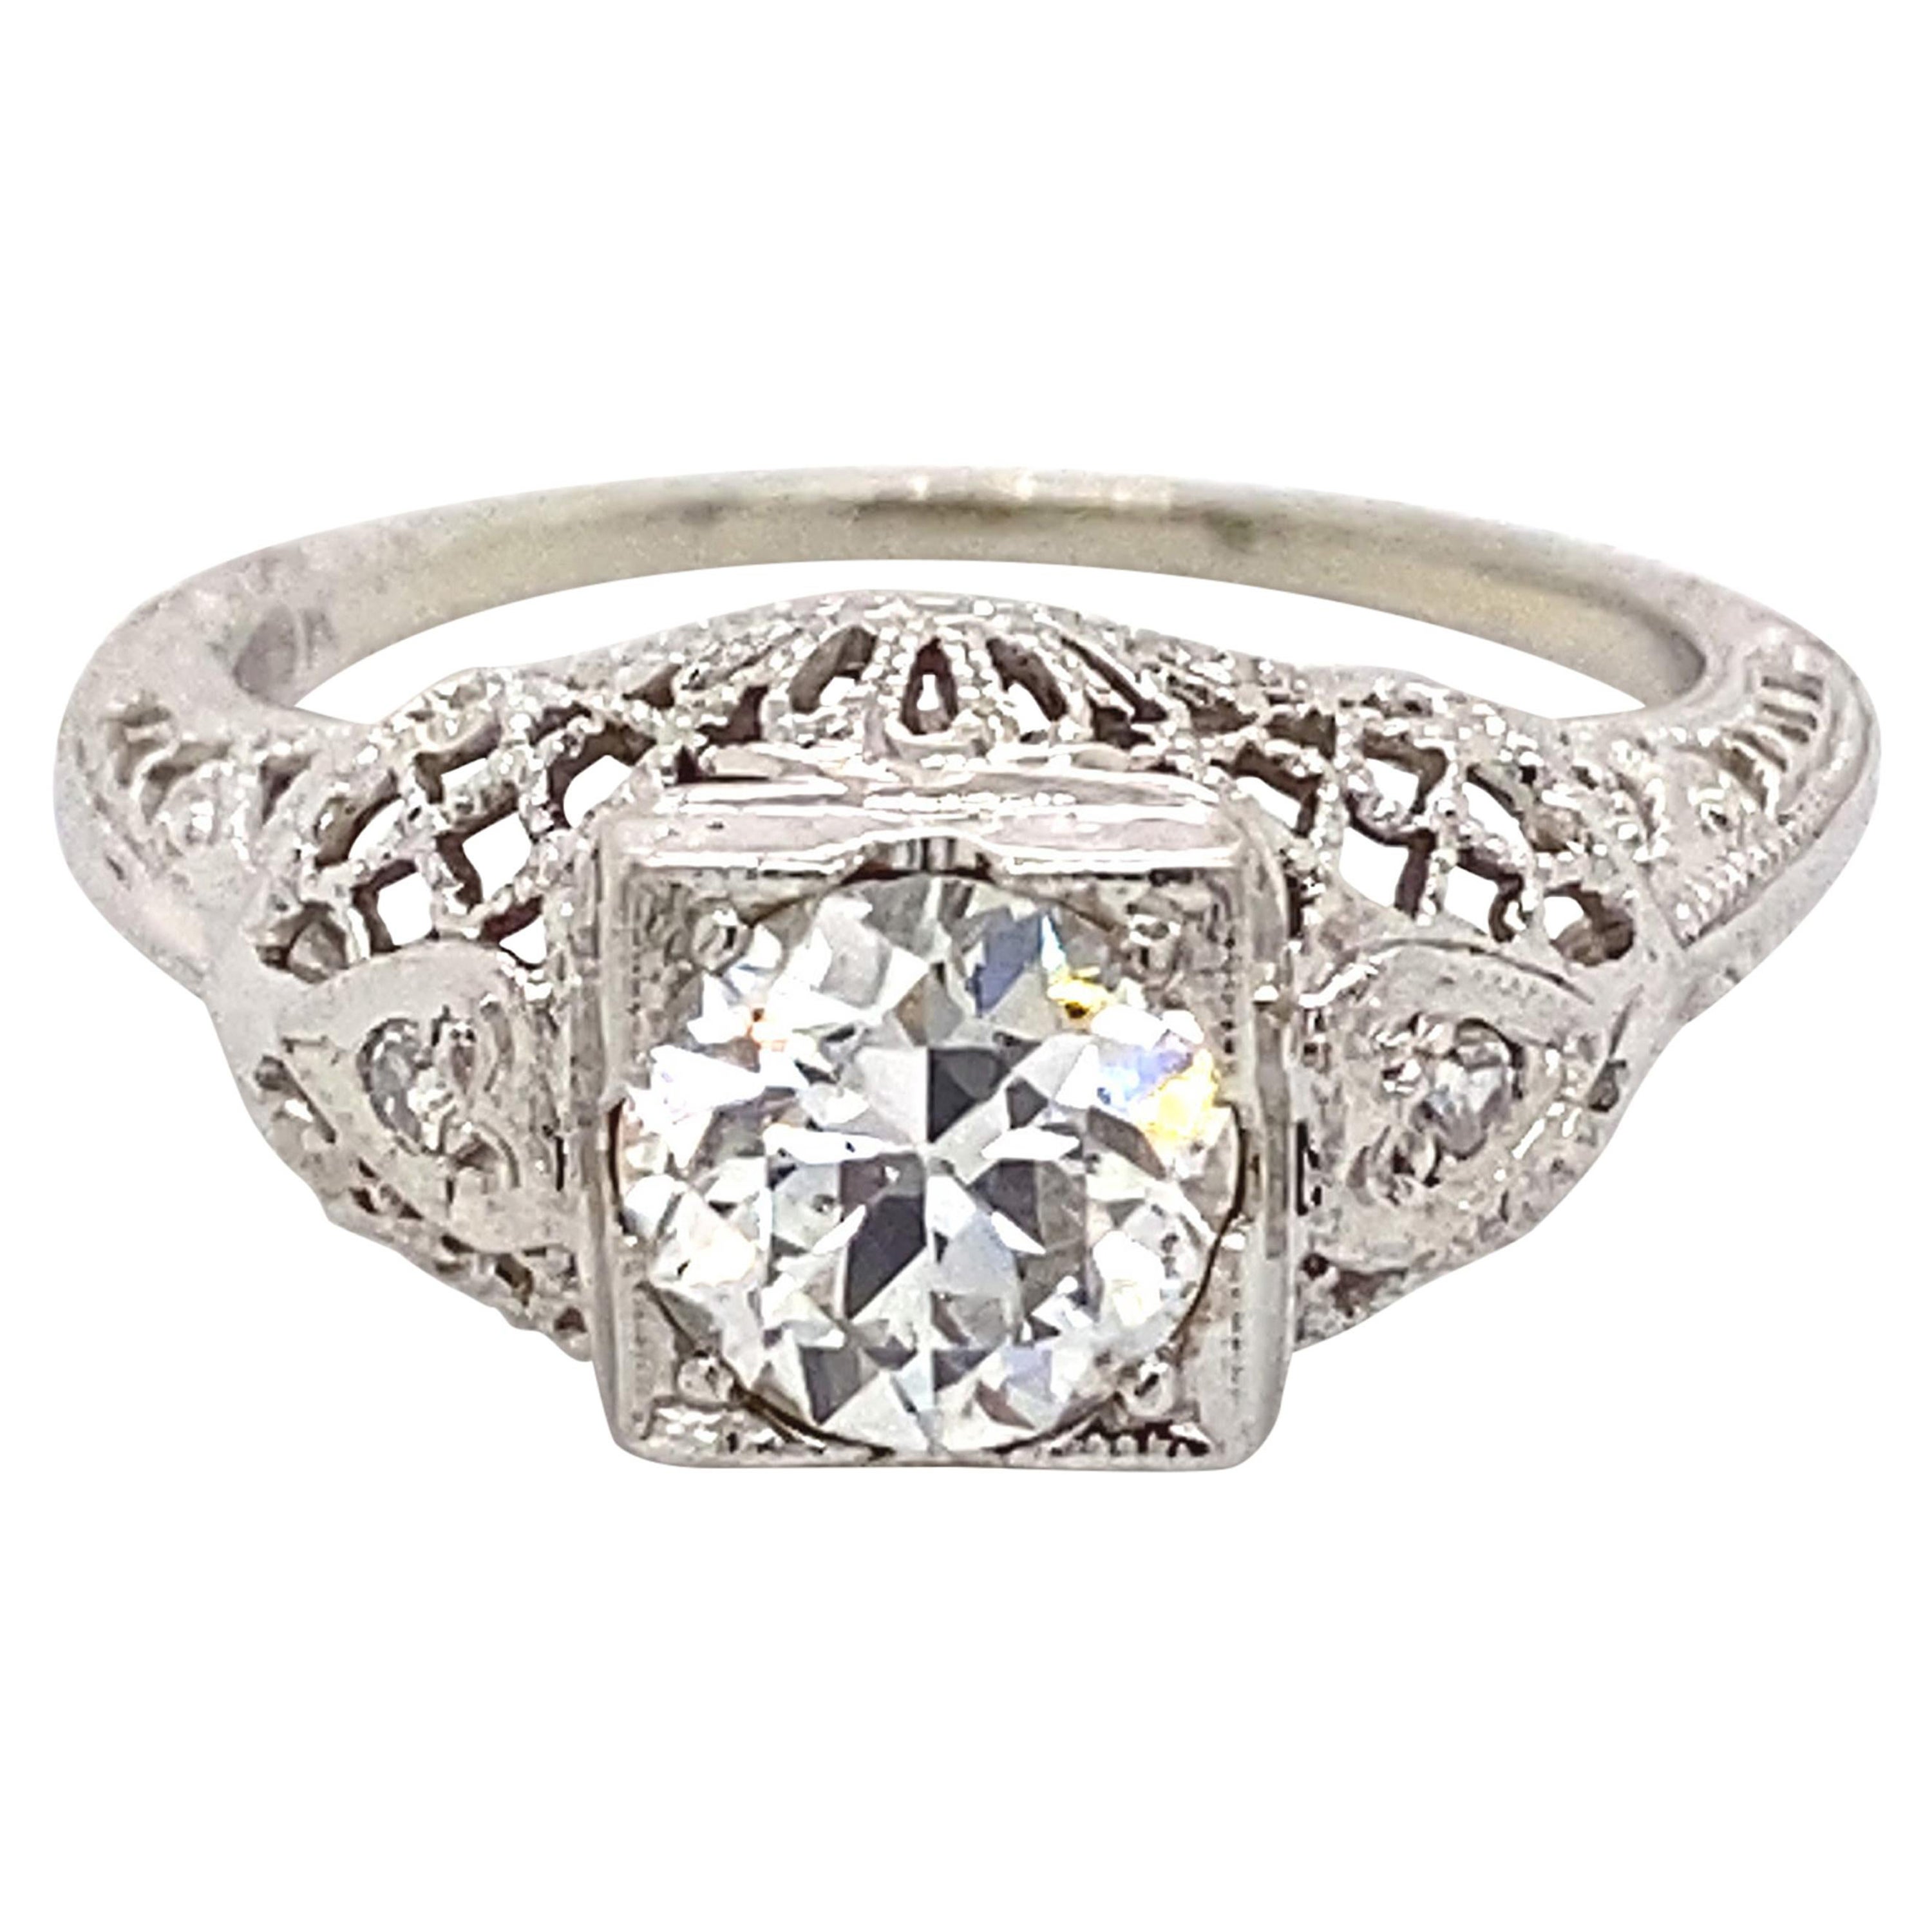 Art Deco Style Apx 0.85ct Old Mine Cut Diamond 18k White Gold Ring